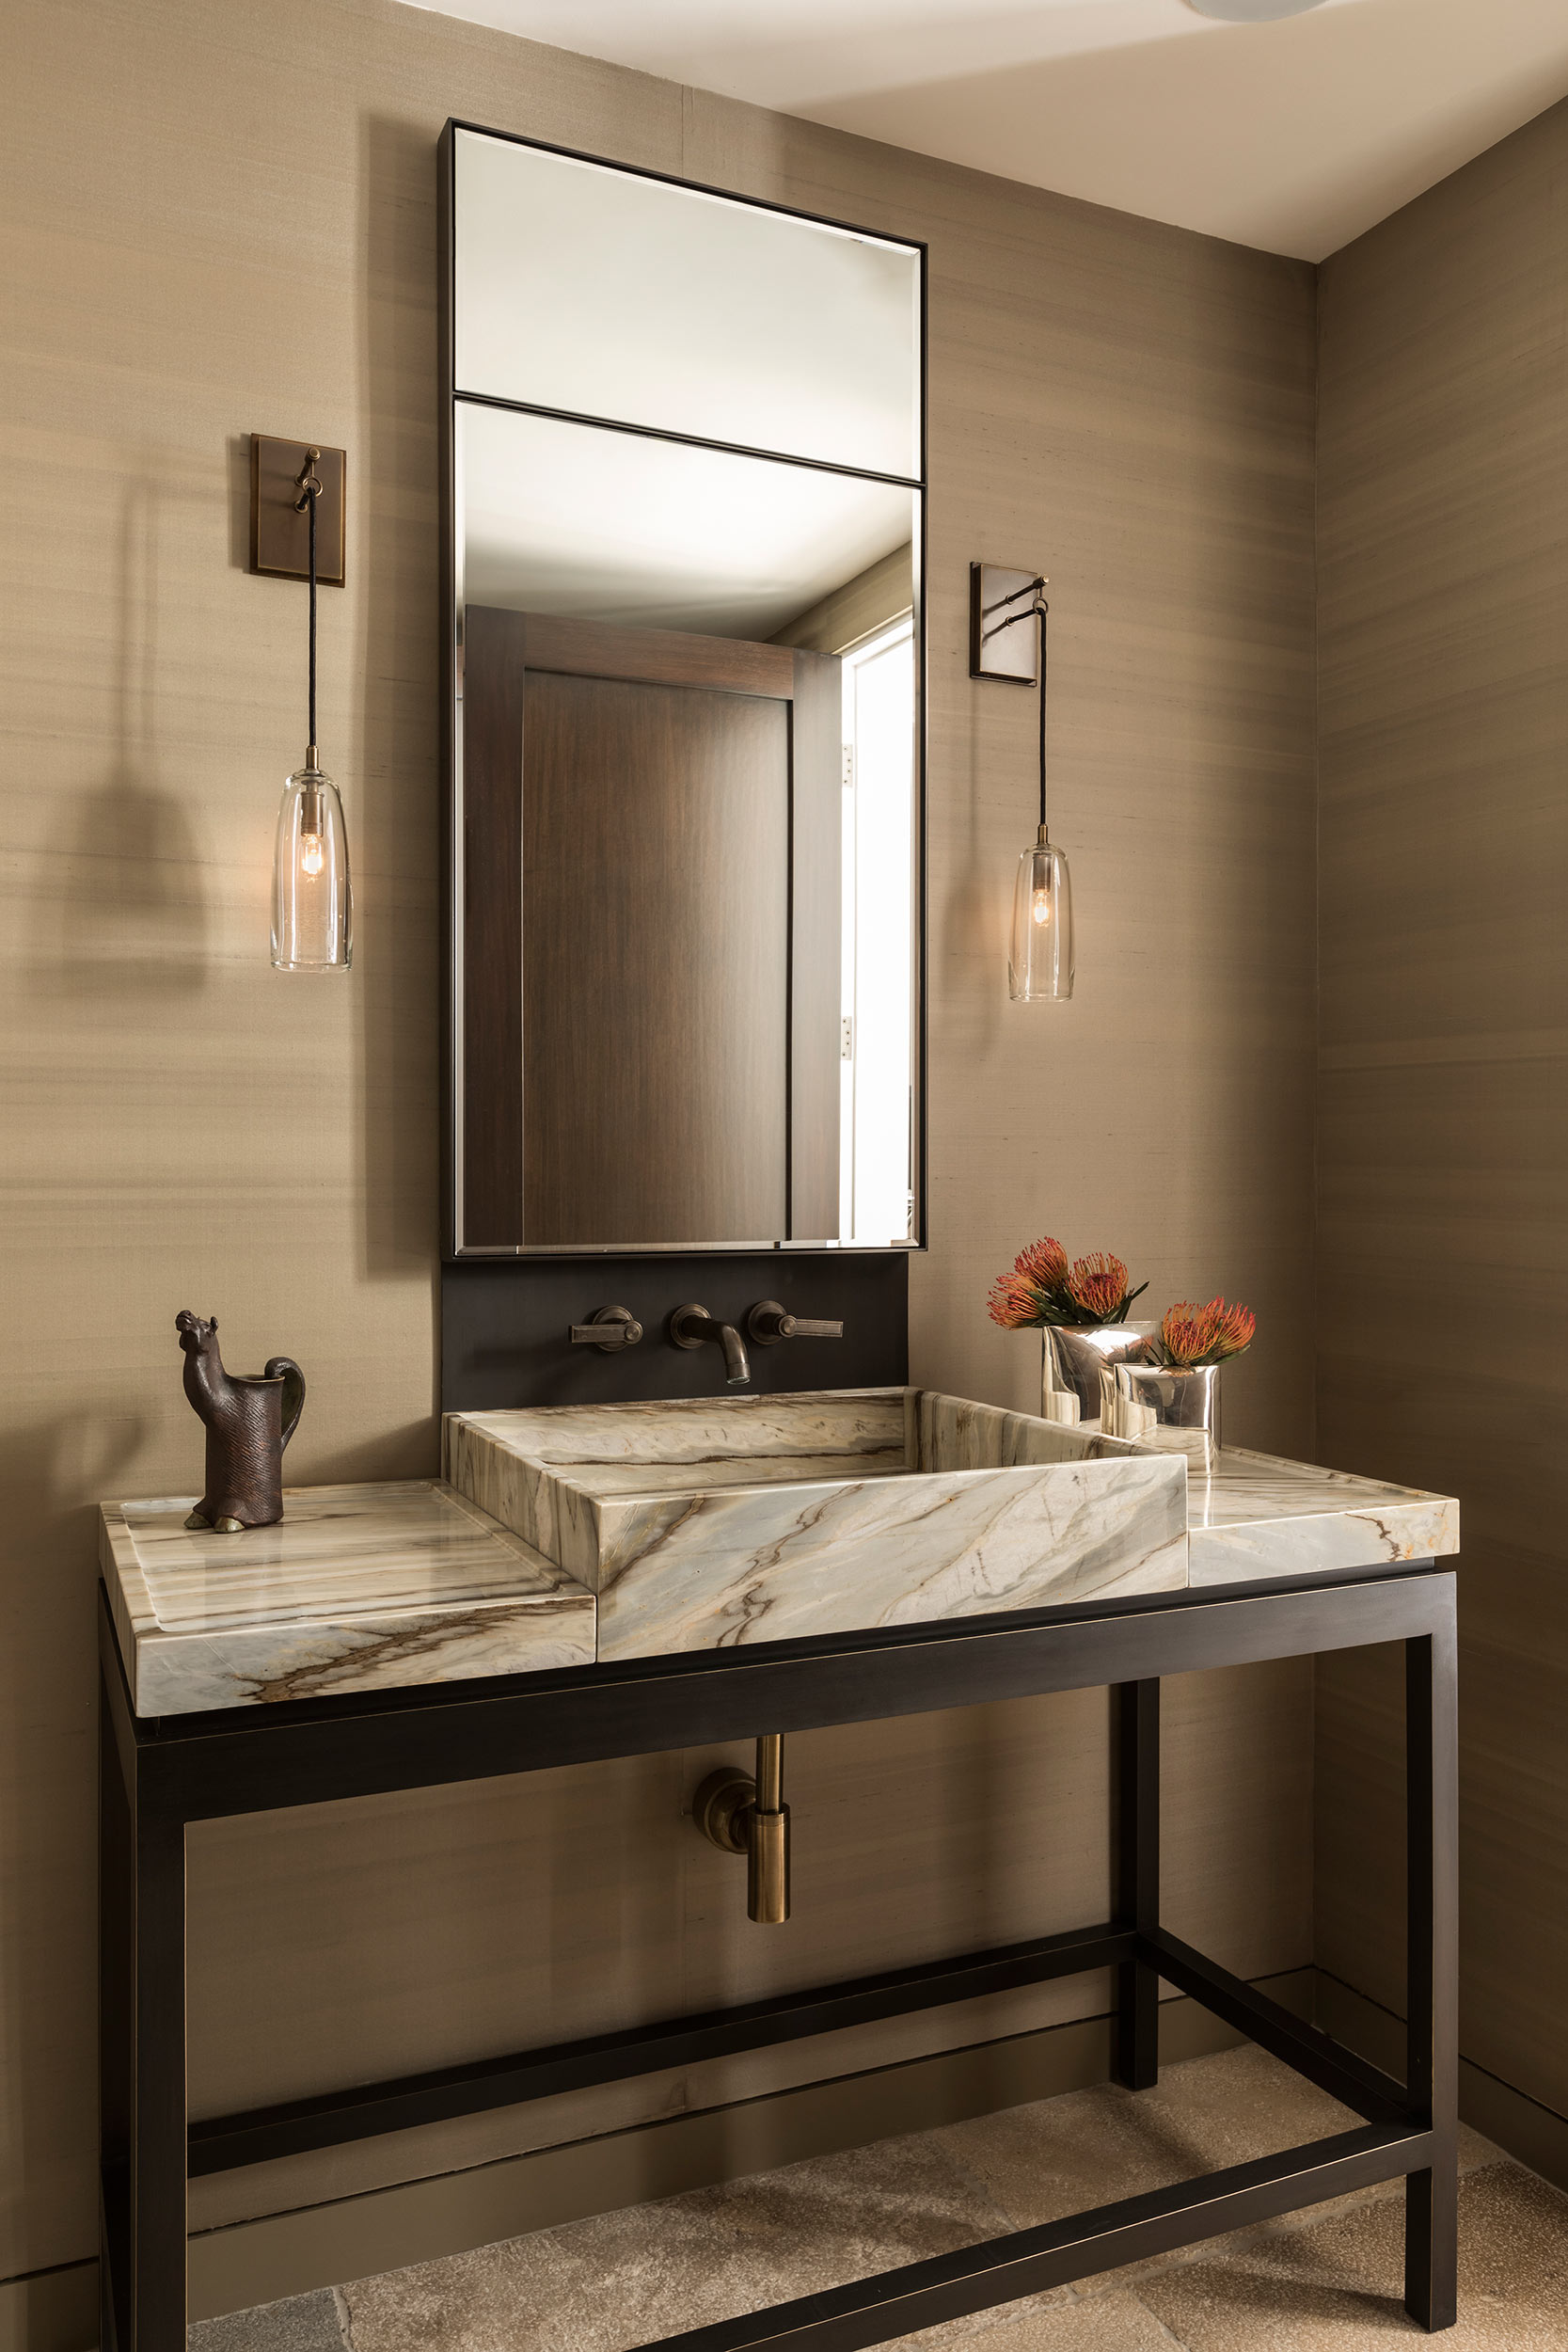 A custom metal and stone vanity makes a statement in the powder room